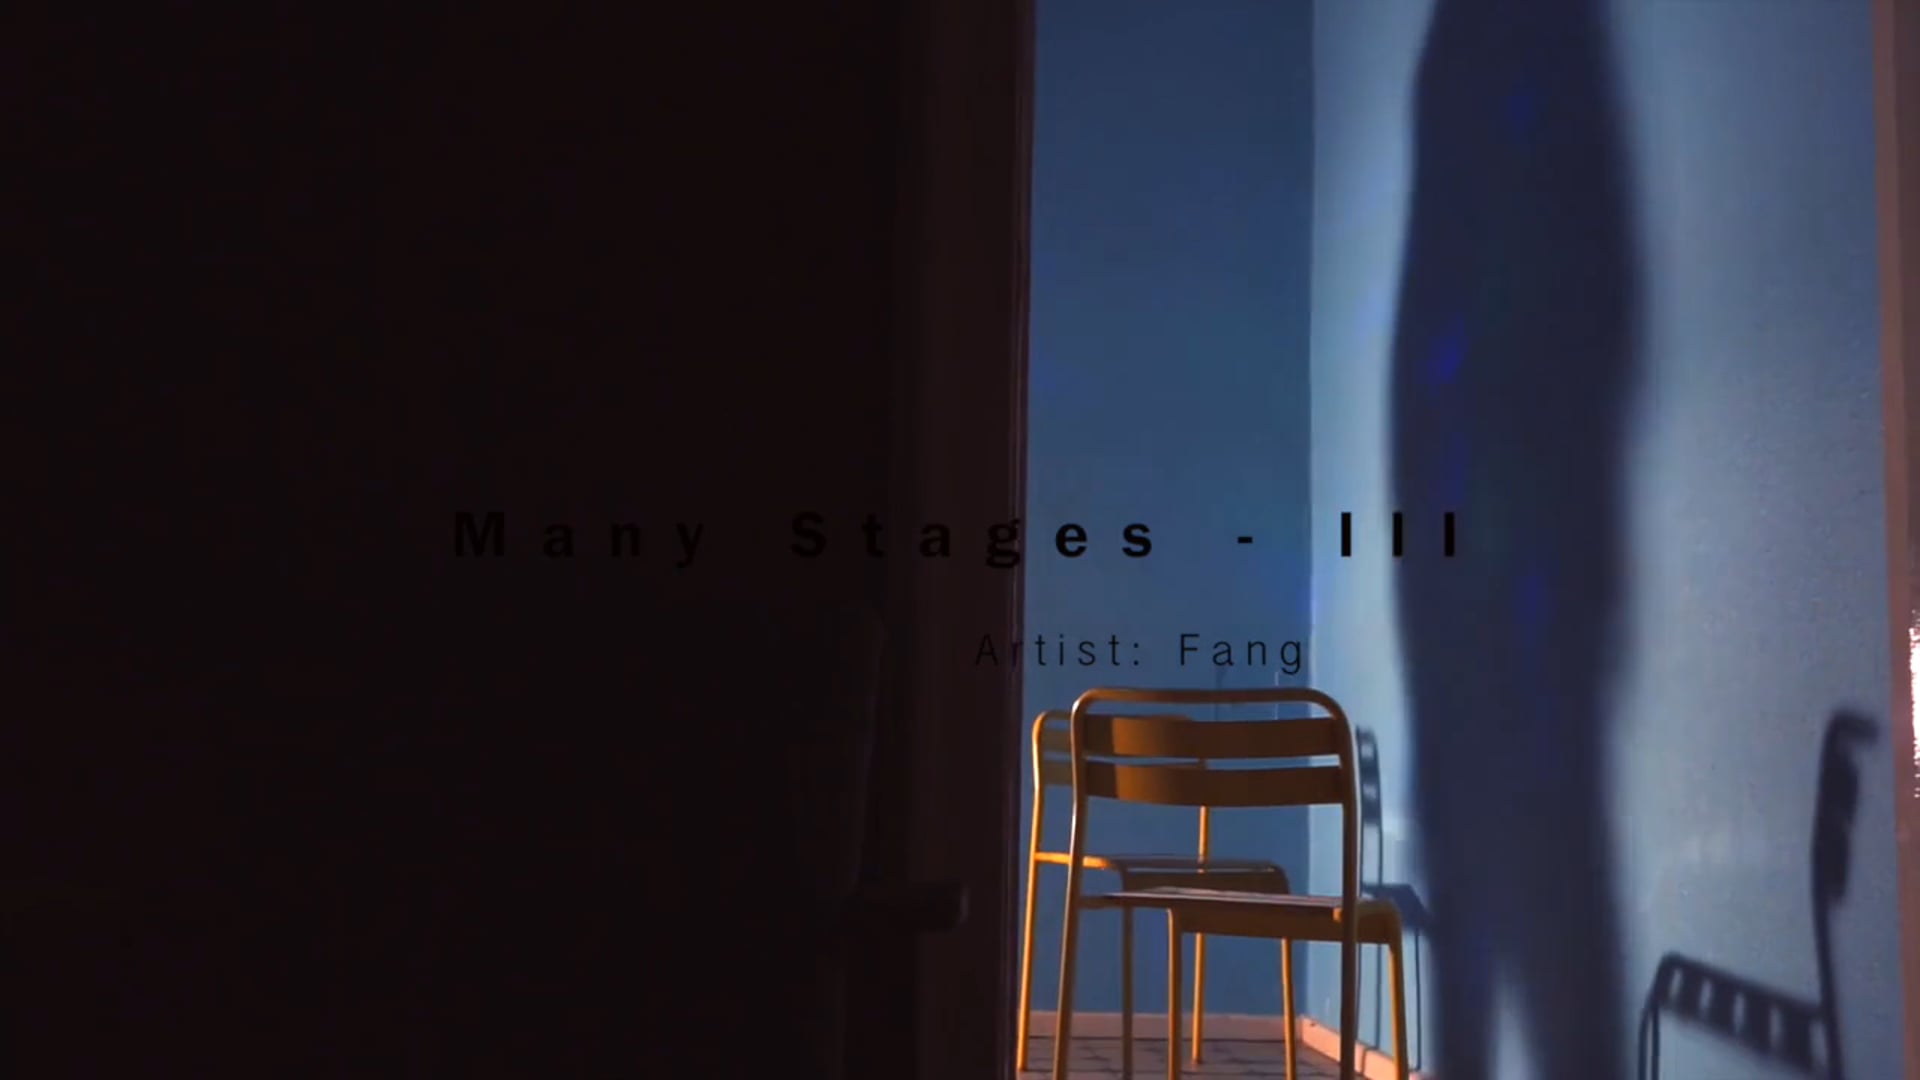 Many stages - III